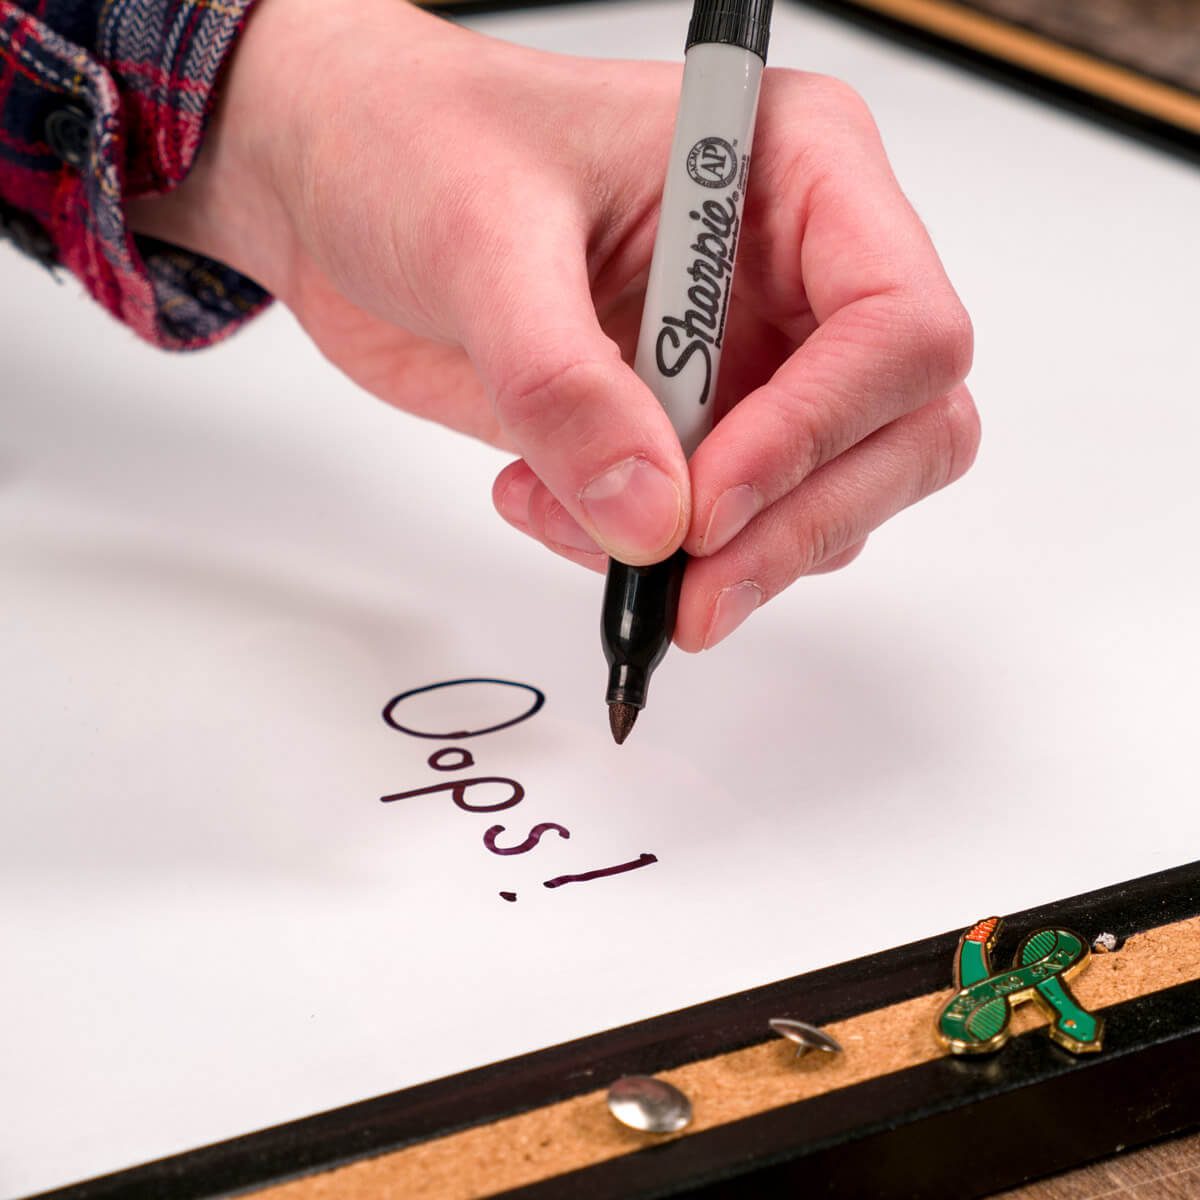 How To Remove Sharpie Permanent Marker From Dry Erase Whiteboard Fastest  And Best Way 